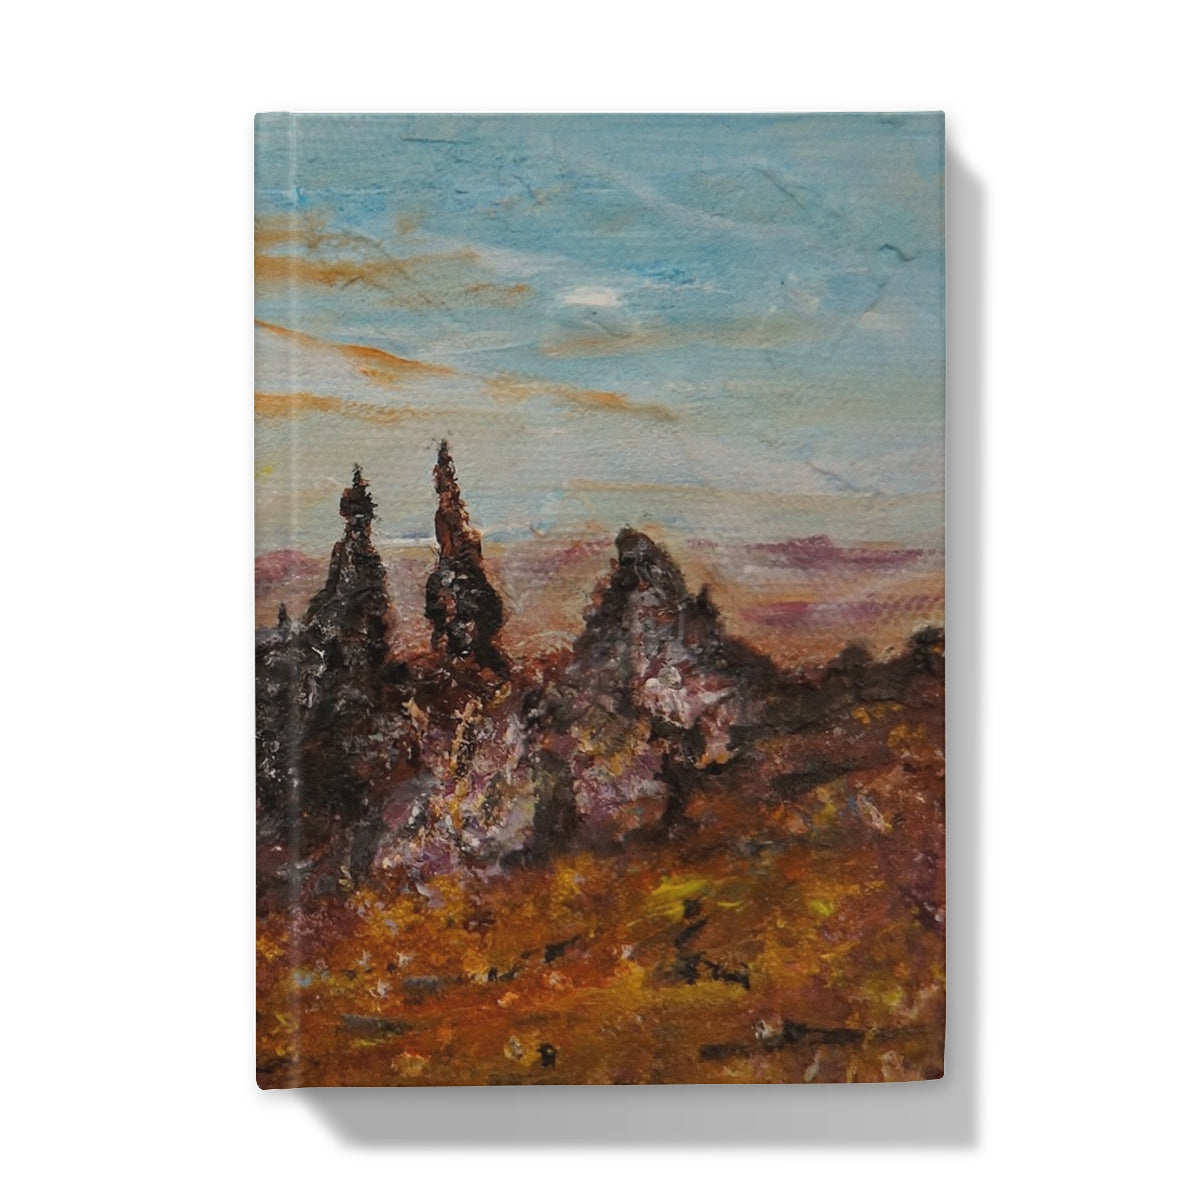 The Old Man Of Storr Skye Art Gifts Hardback Journal-Journals & Notebooks-Skye Art Gallery-A5-Lined-Paintings, Prints, Homeware, Art Gifts From Scotland By Scottish Artist Kevin Hunter